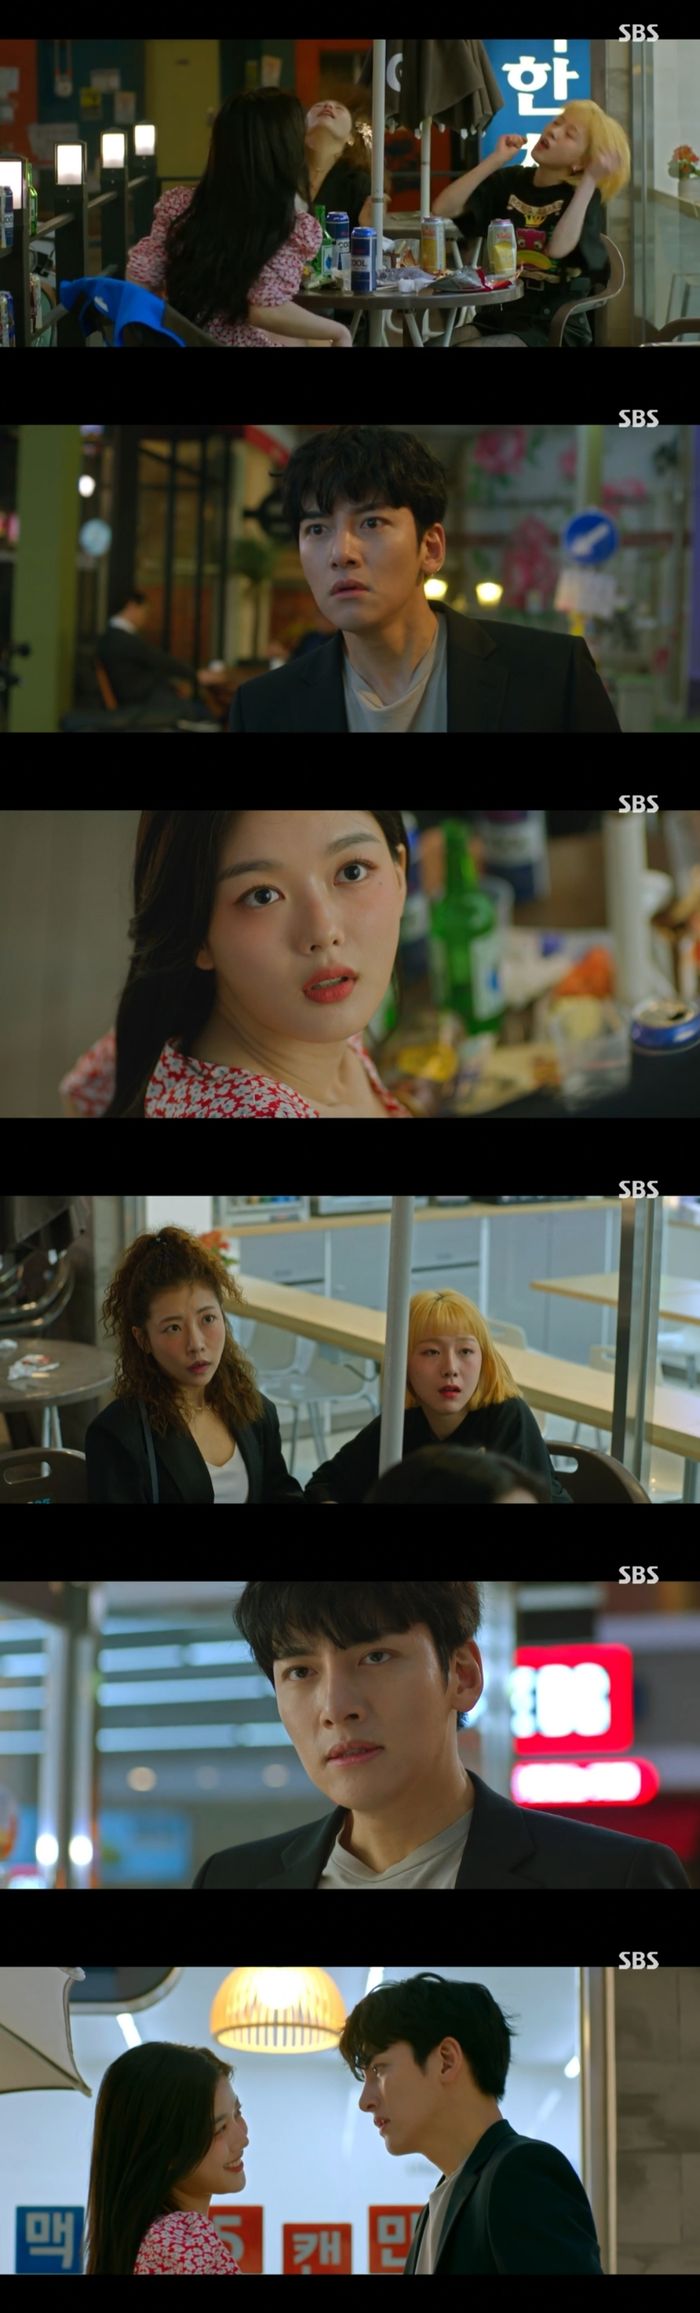 Ji Chang-wook and Kim Yoo-jung met at the Convenience store.In the SBS new gilt drama Convenience store morning star (playwright Son Geun-joo, director Lee Myung-woo), Choi Dae-heon (Ji Chang-wook) and Kim Yoo-jung (played by Convenience store manager - Alba) were broadcast on the 19th.On the day of the broadcast, the star of the uniform told Choi Dae-heon, Do not buy three pieces of Soboro Mensol from the Convenience store, it seems like a good person.Choi Dae-heon appeared with a black plastic bag, even though he said, Im not a good person, you guys, Im funny. Where do you want to buy a cigarette?But it was candy, and Choi Dae-heon said, Get off if you want, youre bone-sweeping, youre grown up and youre going to be a youth in a wonderful job.It is the first time that a brother who told me to quit smoking is interested.Three years later, Choi Dae-heon and Jeong Sae-byeol made The Slap as Convenience store manager and Alba.I came to see an Alba interview, said Jeong Sae-byeol, but Choi Dae-heon recalled the past, saying, Its cold, these Feelings with a dagger stuck in their chests.I can go to work tomorrow, Choi Dae-heon said, I am suspicious.I feel sorry for the manager GFriend. Michael will see me every day now, and then I will fall in love with my girlfriend.Please tell GFriend that I am sorry in advance. Choi Dae-heon turned to the star, saying, This is serious. Its Age to get dementia. Get yourself together and work.Meanwhile, Han Dal-sik (Peum Mun-seok) told Choi Dae-heon, who emptied the Convenience store, Your Alba is a mess while calling friends from the Convenience store parasol.It is Feelings at the beach mud festival hall. 